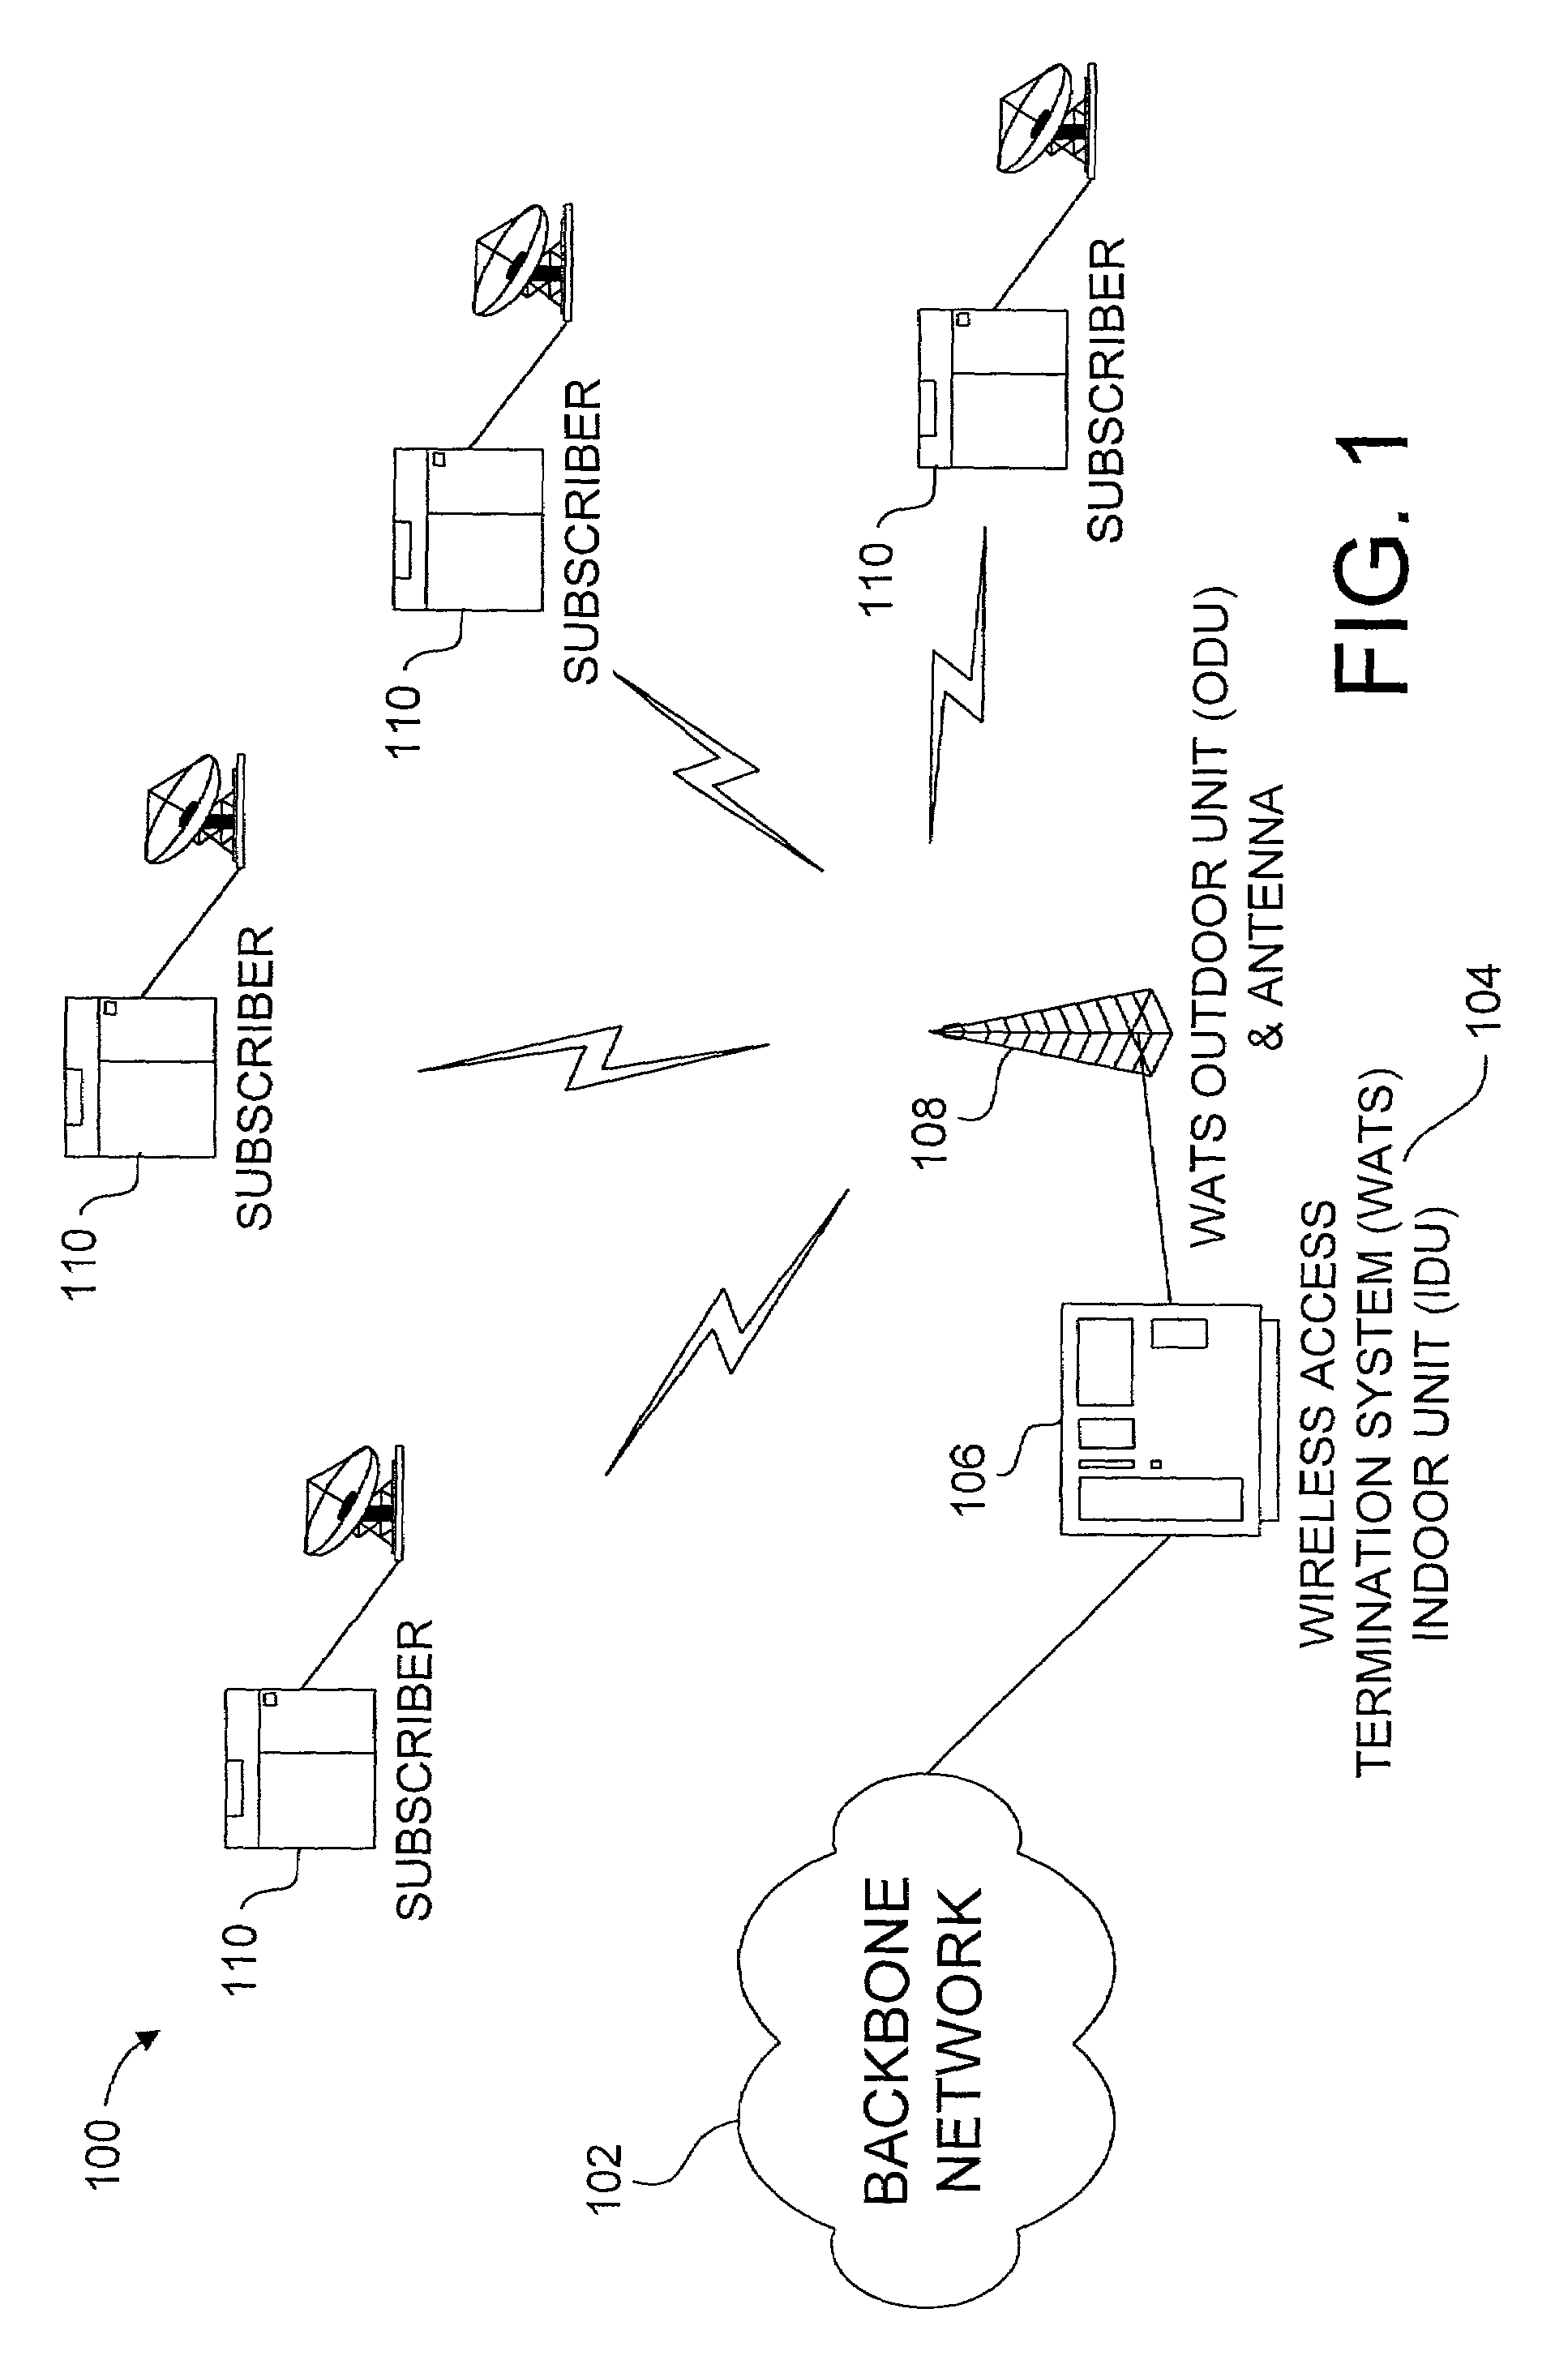 Adaptive modulation for fixed wireless link in cable transmission system